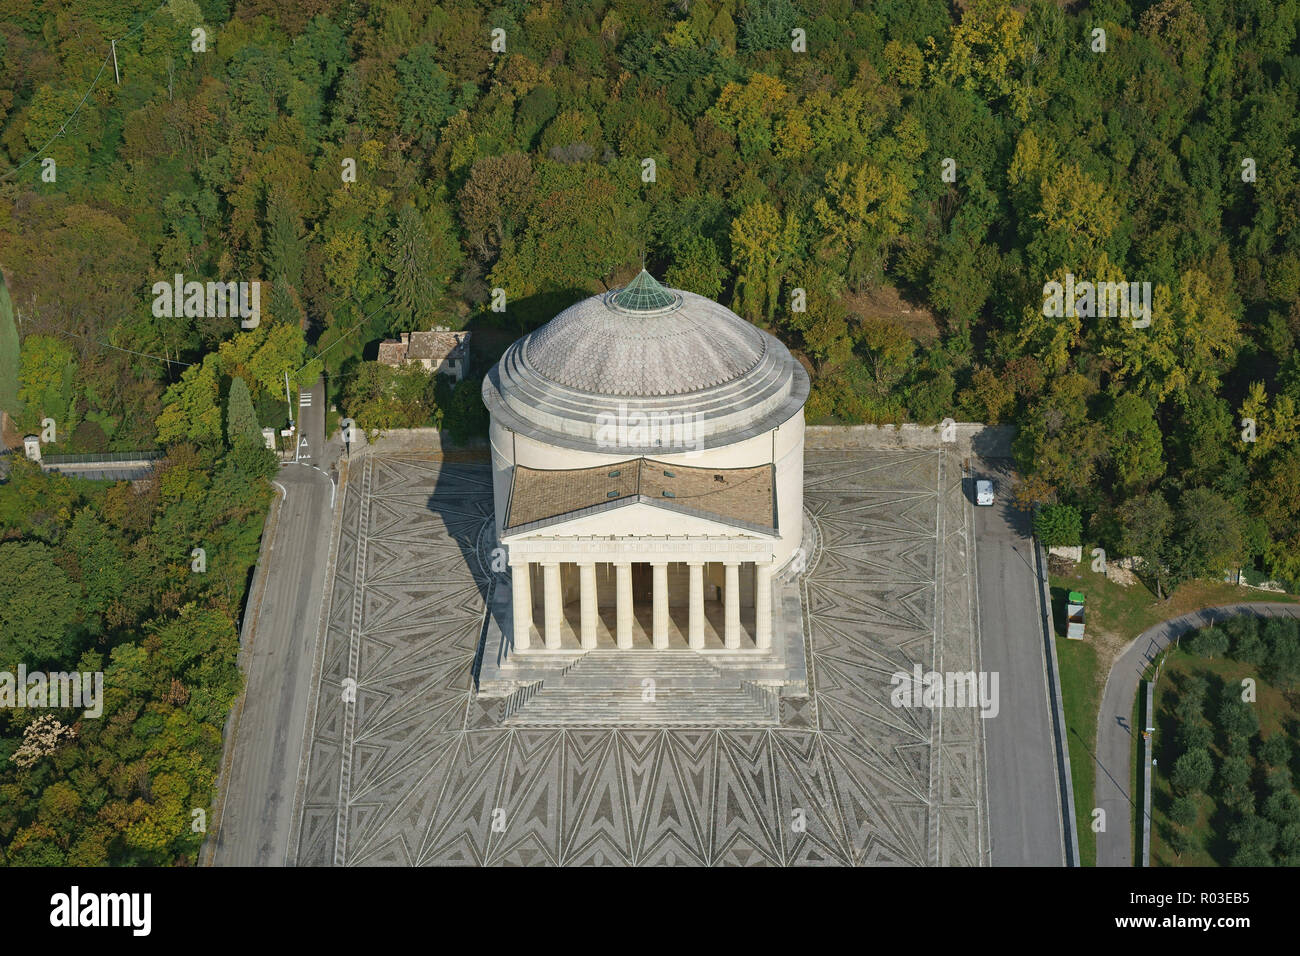 AERIAL VIEW. Temple of Canoviano with a background of trees with autumnal colors. Possagno, Province of Treviso, Veneto, Italy. Stock Photo